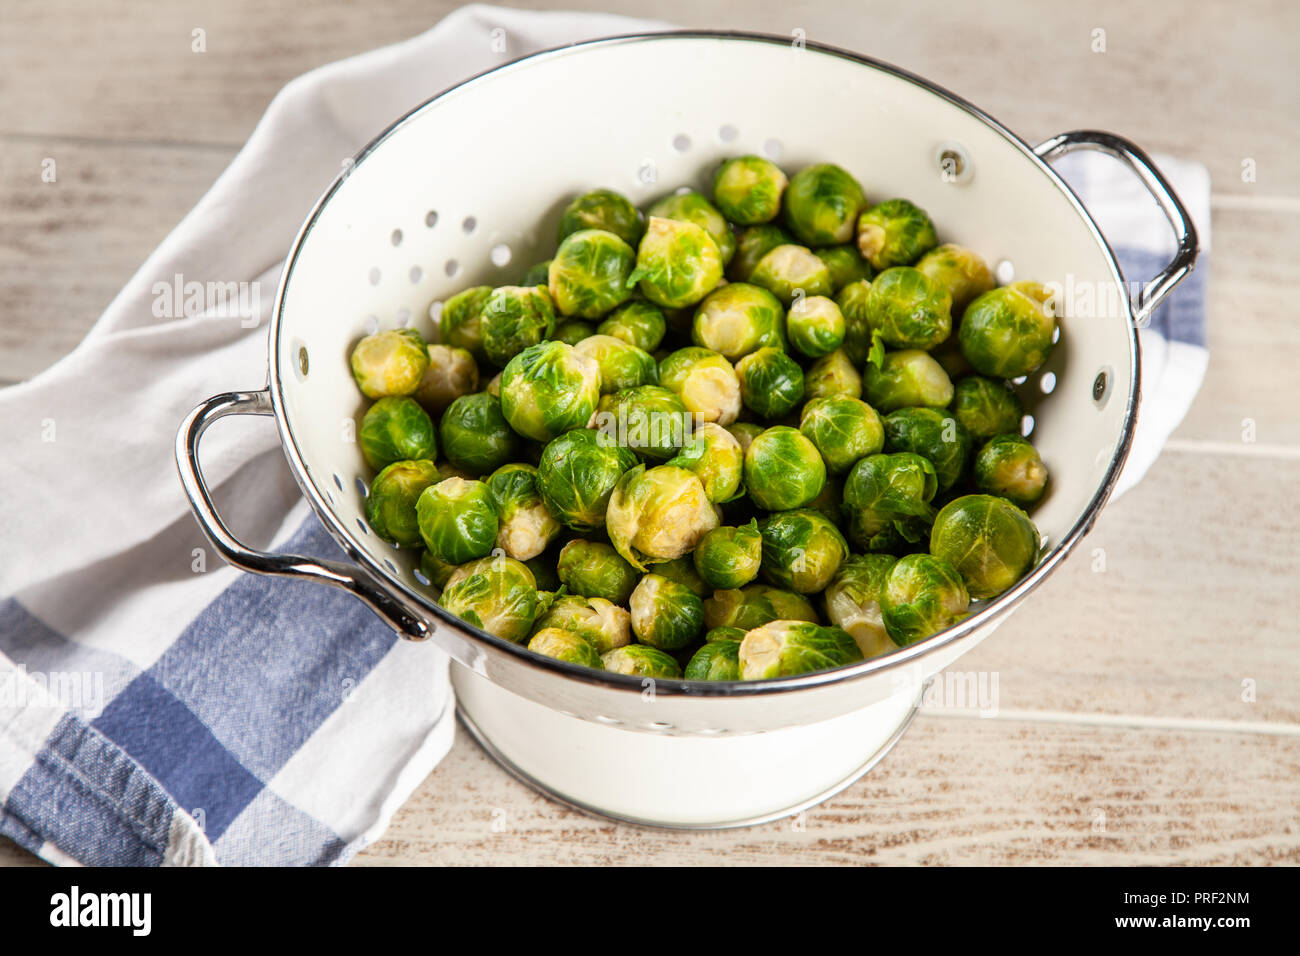 Fresh brussles sprouts Stock Photo